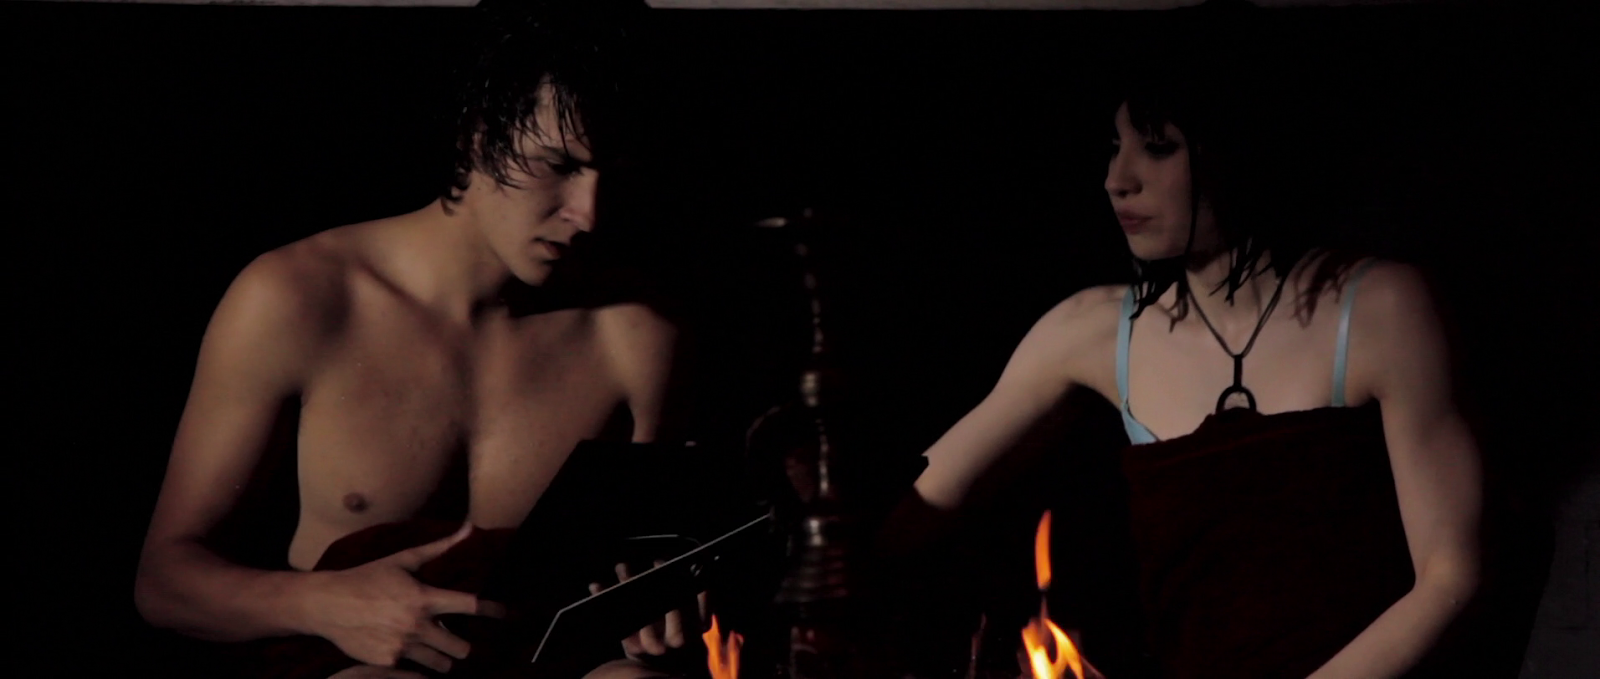 ausCAPS: Devon Bostick and Kristopher Turner shirtless in 